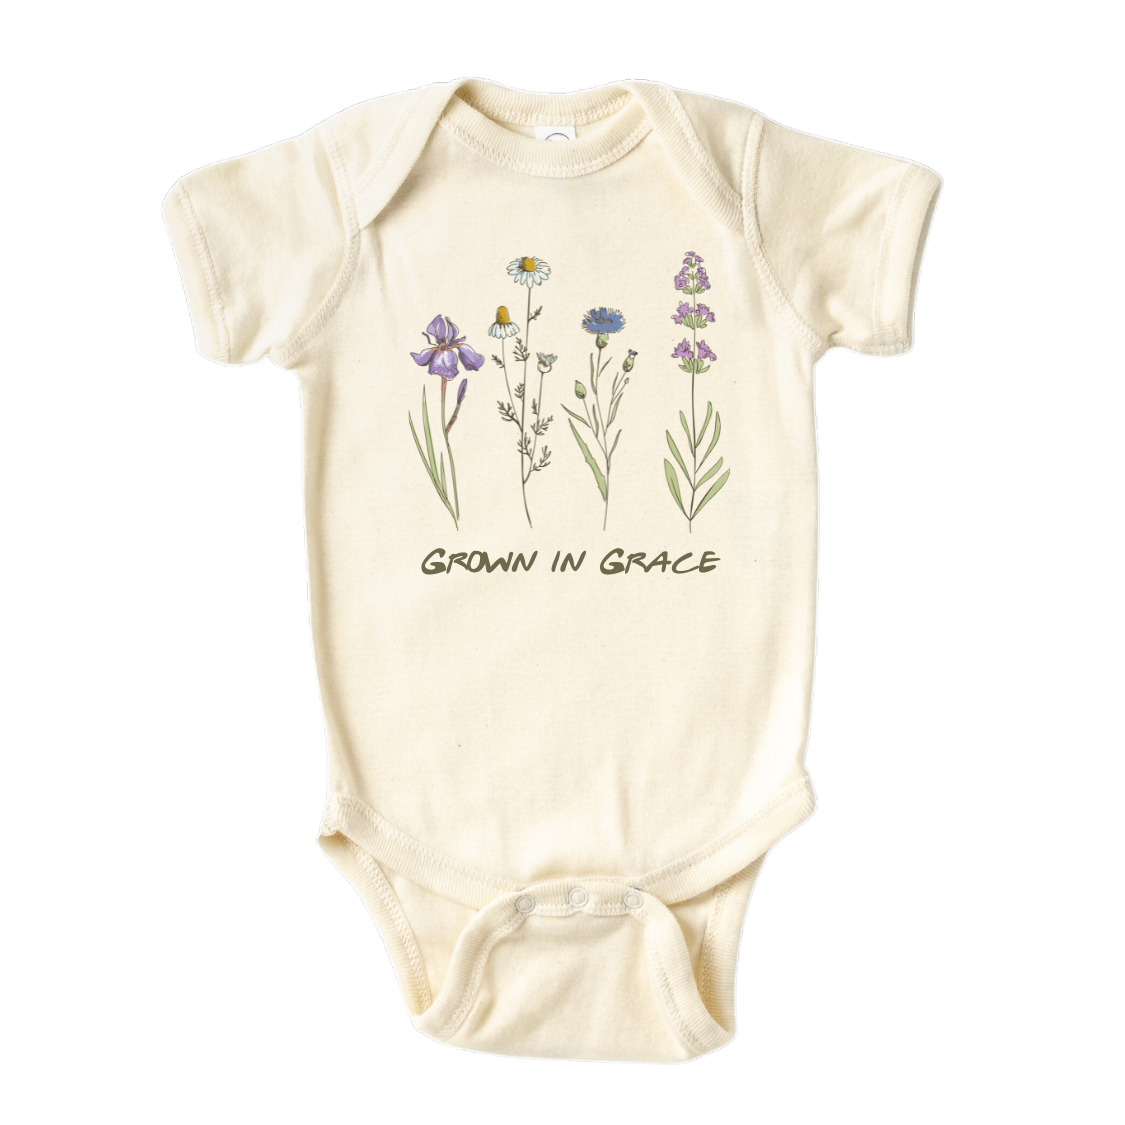 baby girl clothes baby essentials baby boy clothes newborn essentials must haves baby bodysuit gender neutral baby clothes baby boy outfits baby onesies newborn onesies baby girl onesies funny baby onesies